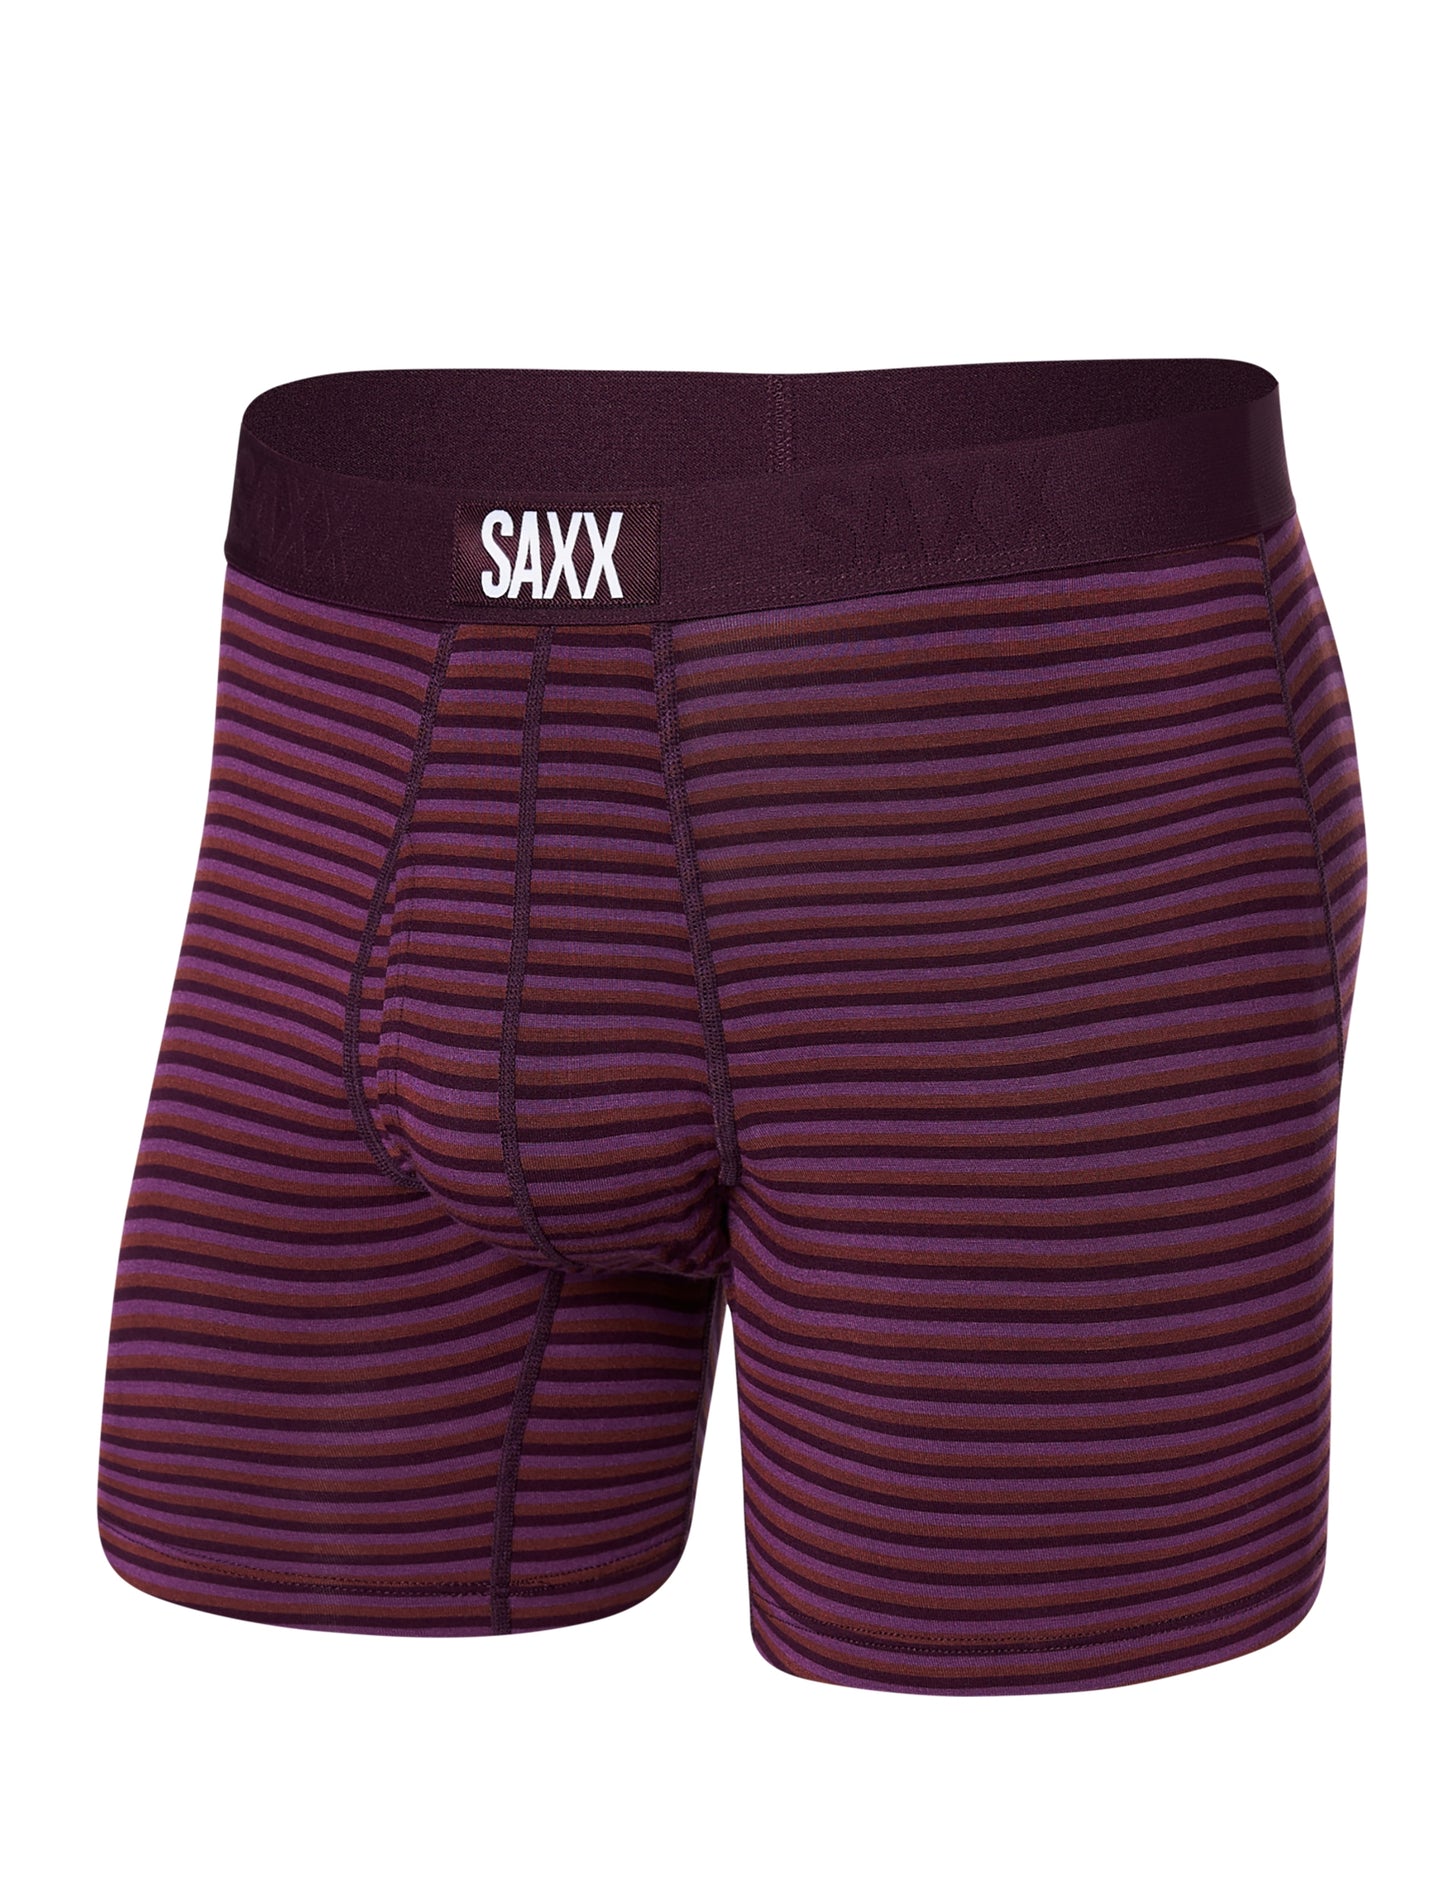 SAXX Underwear Ultra Boxer Regular Fit Huddle is Real – Whisper